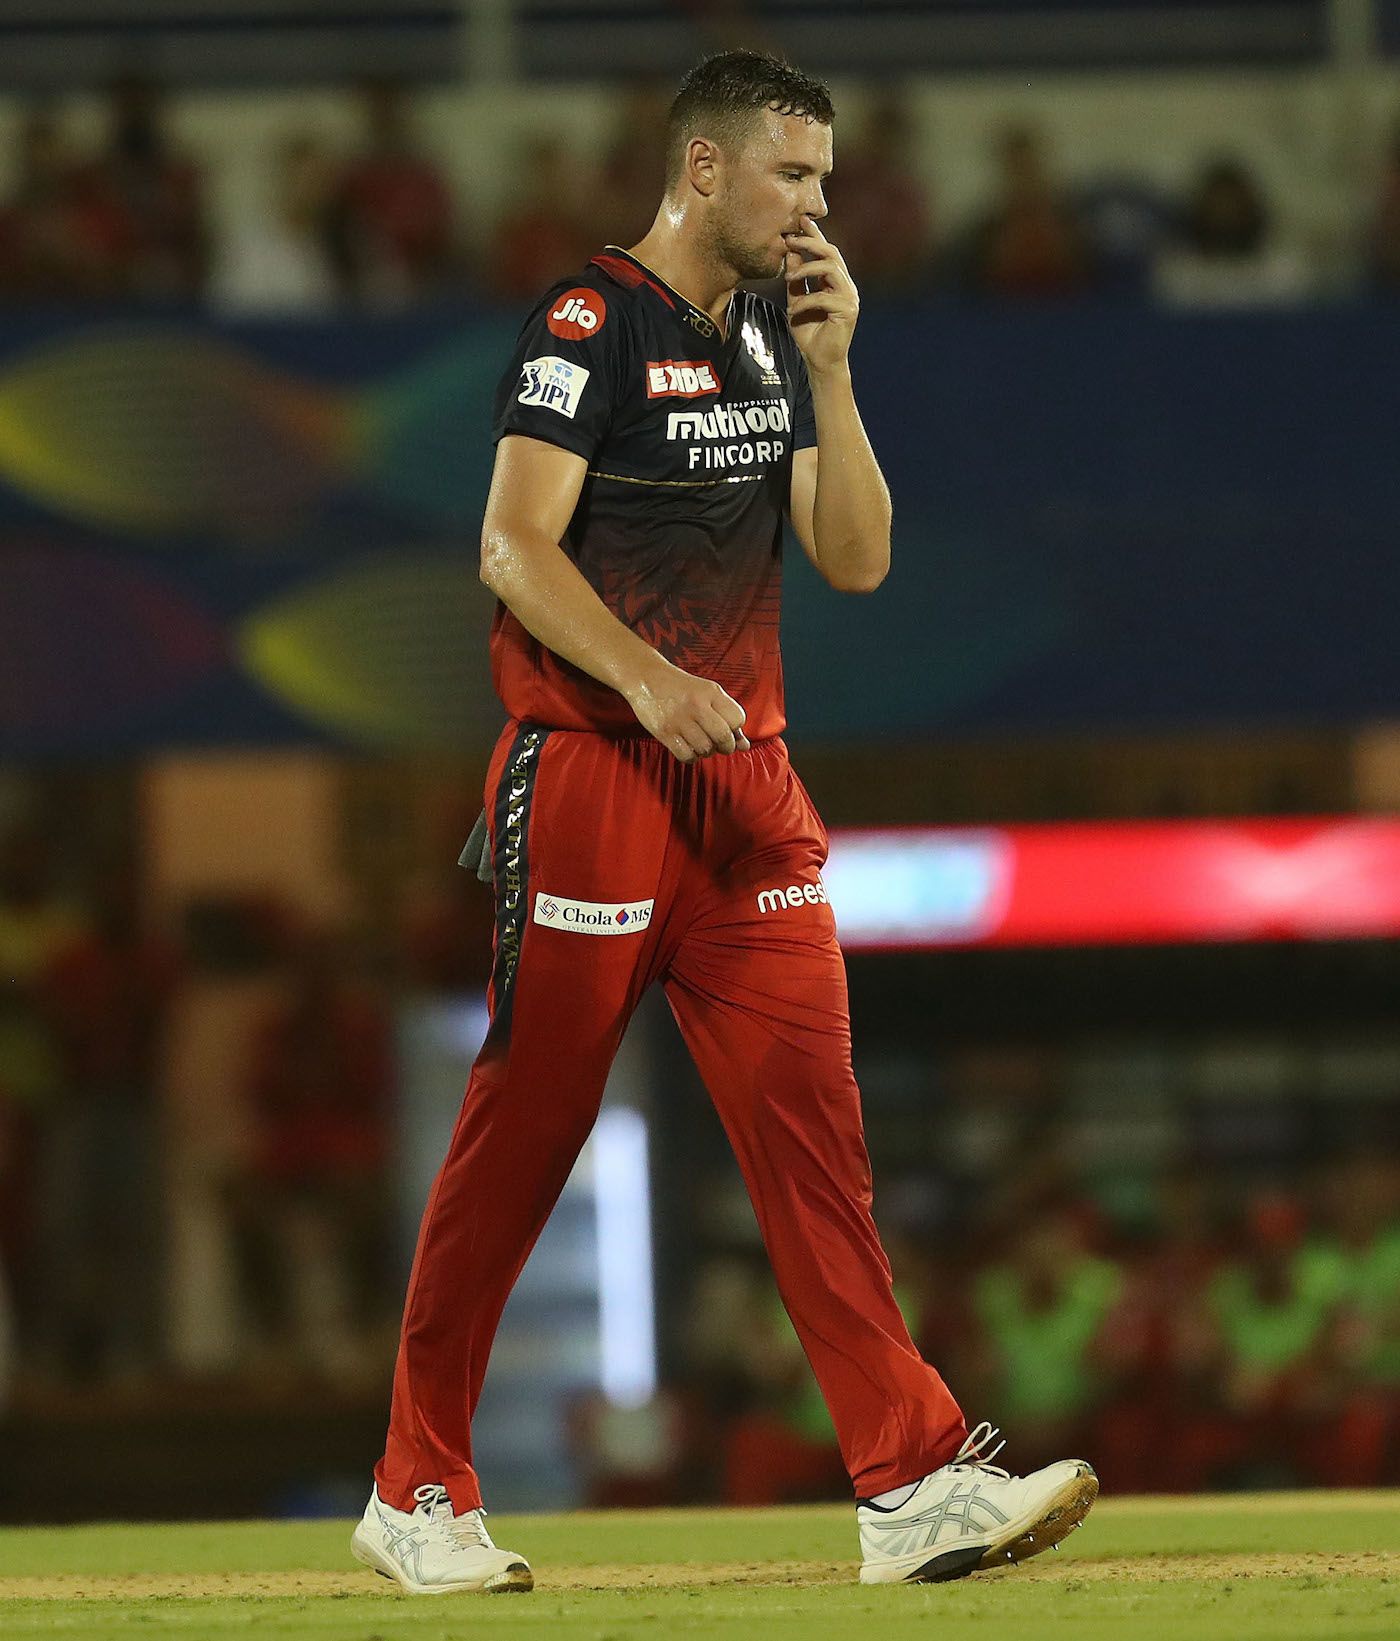 Josh Hazlewood conceded 64 runs in his four wicketless overs